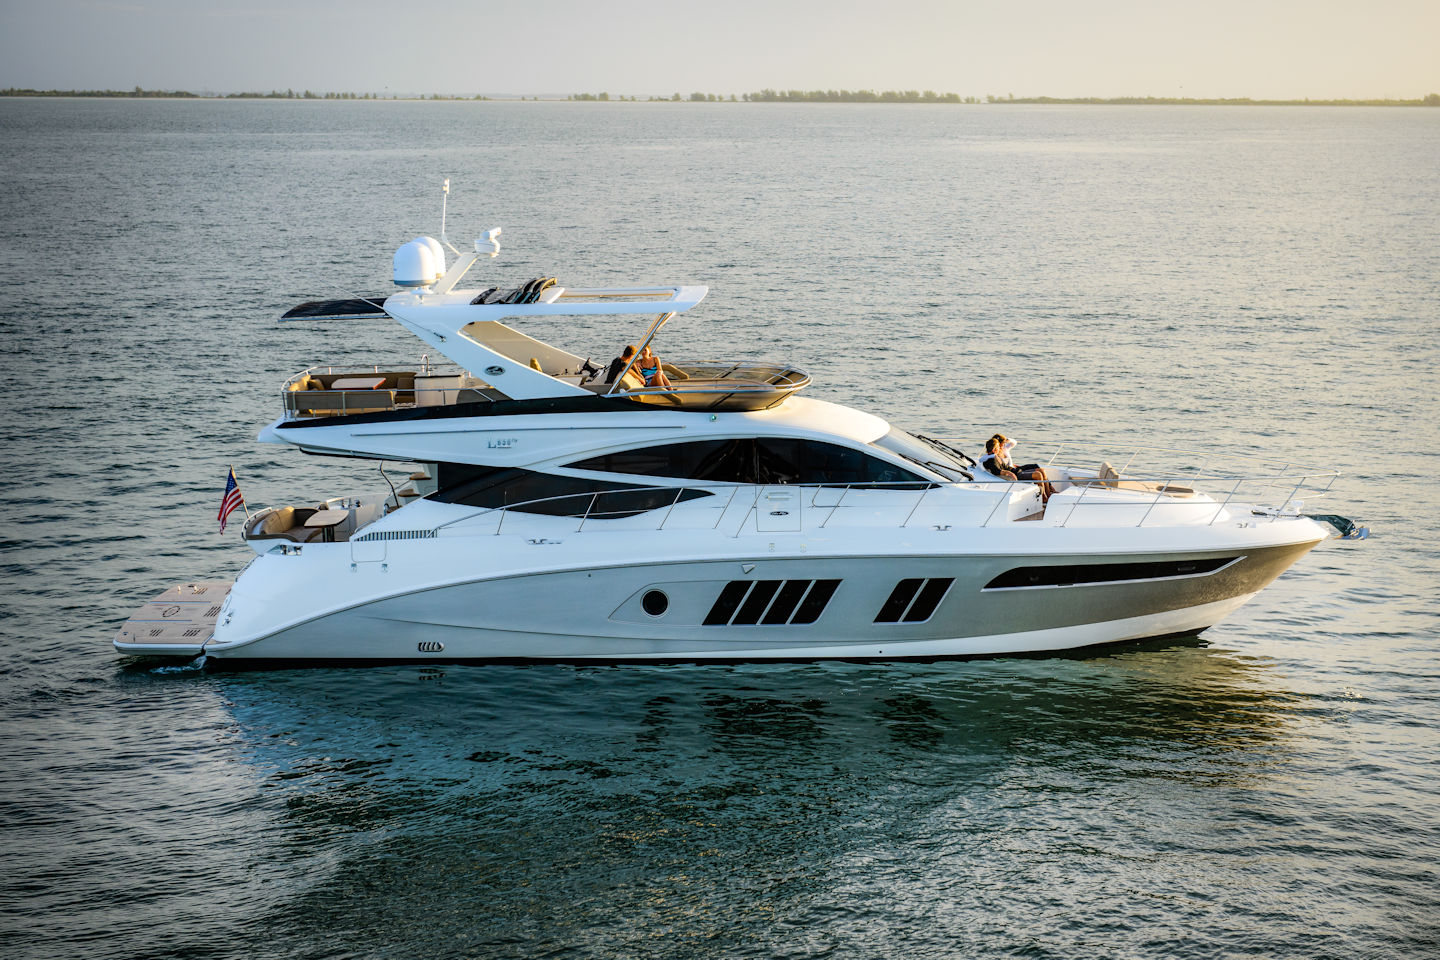 360 VR Virtual Tours of the Sea Ray L650 Fly